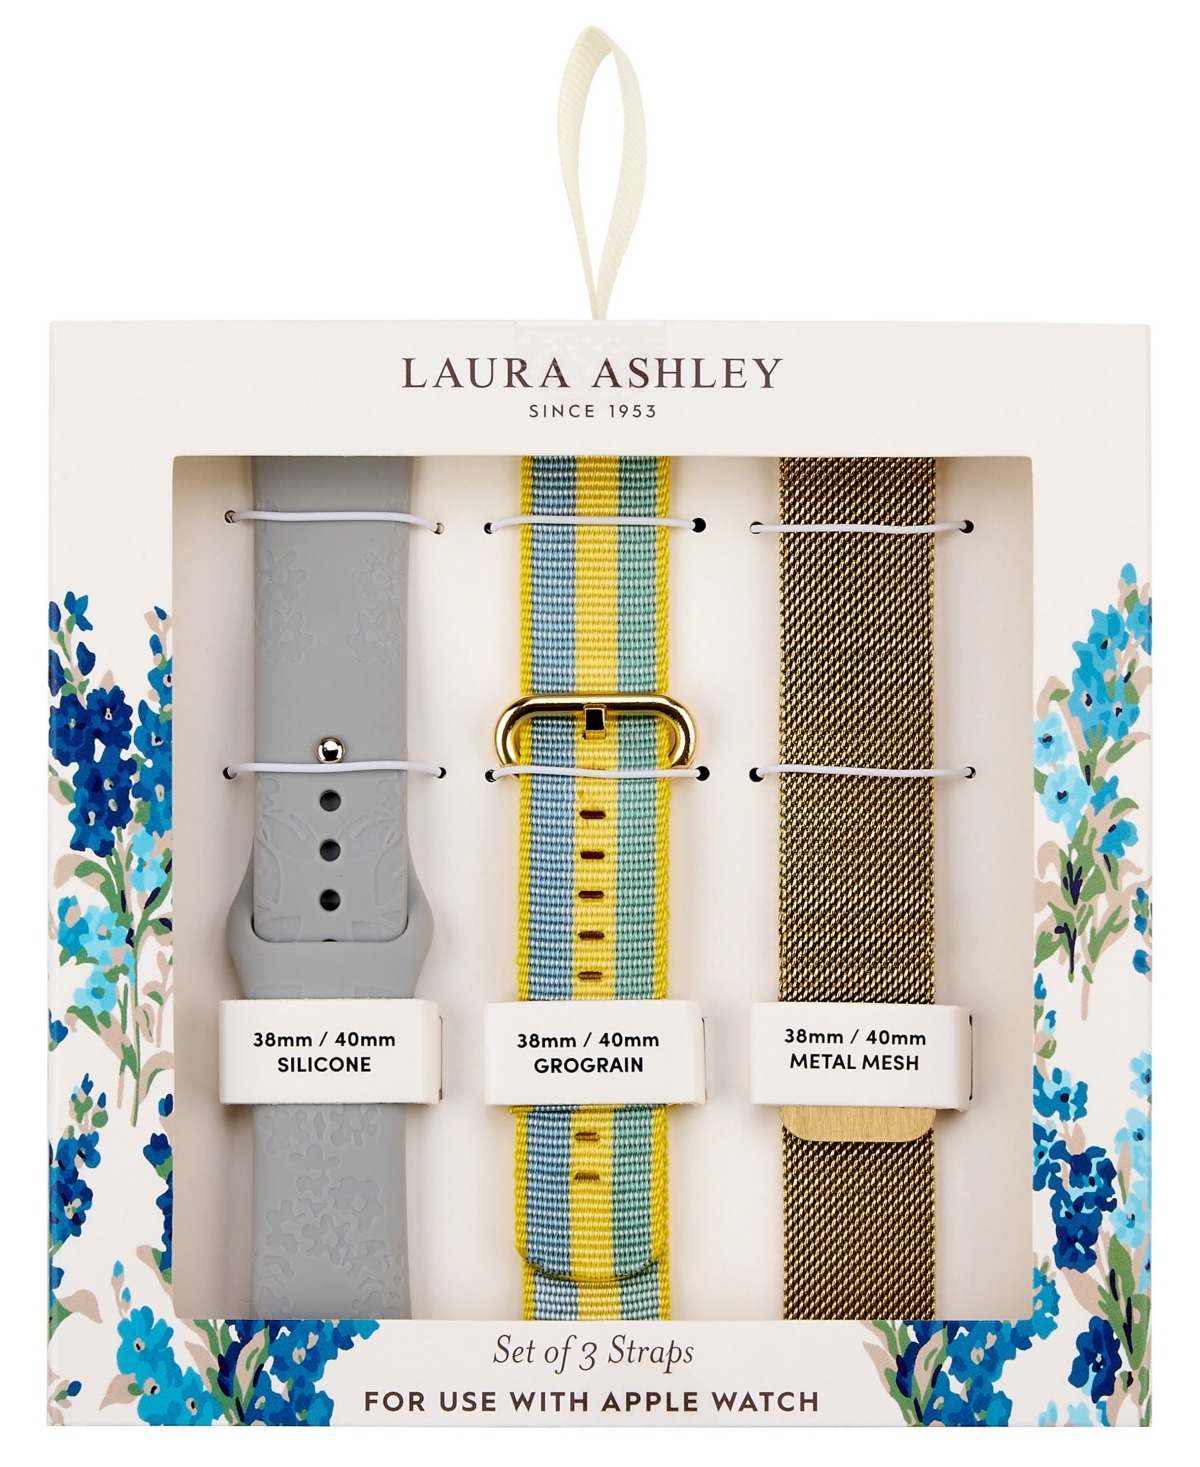 Women's Gold-Tone Mesh, Yellow Grosgrain and Gray Silicone Strap Set Compatible with Apple Watch 38mm, 40mm, 41mm - Multi